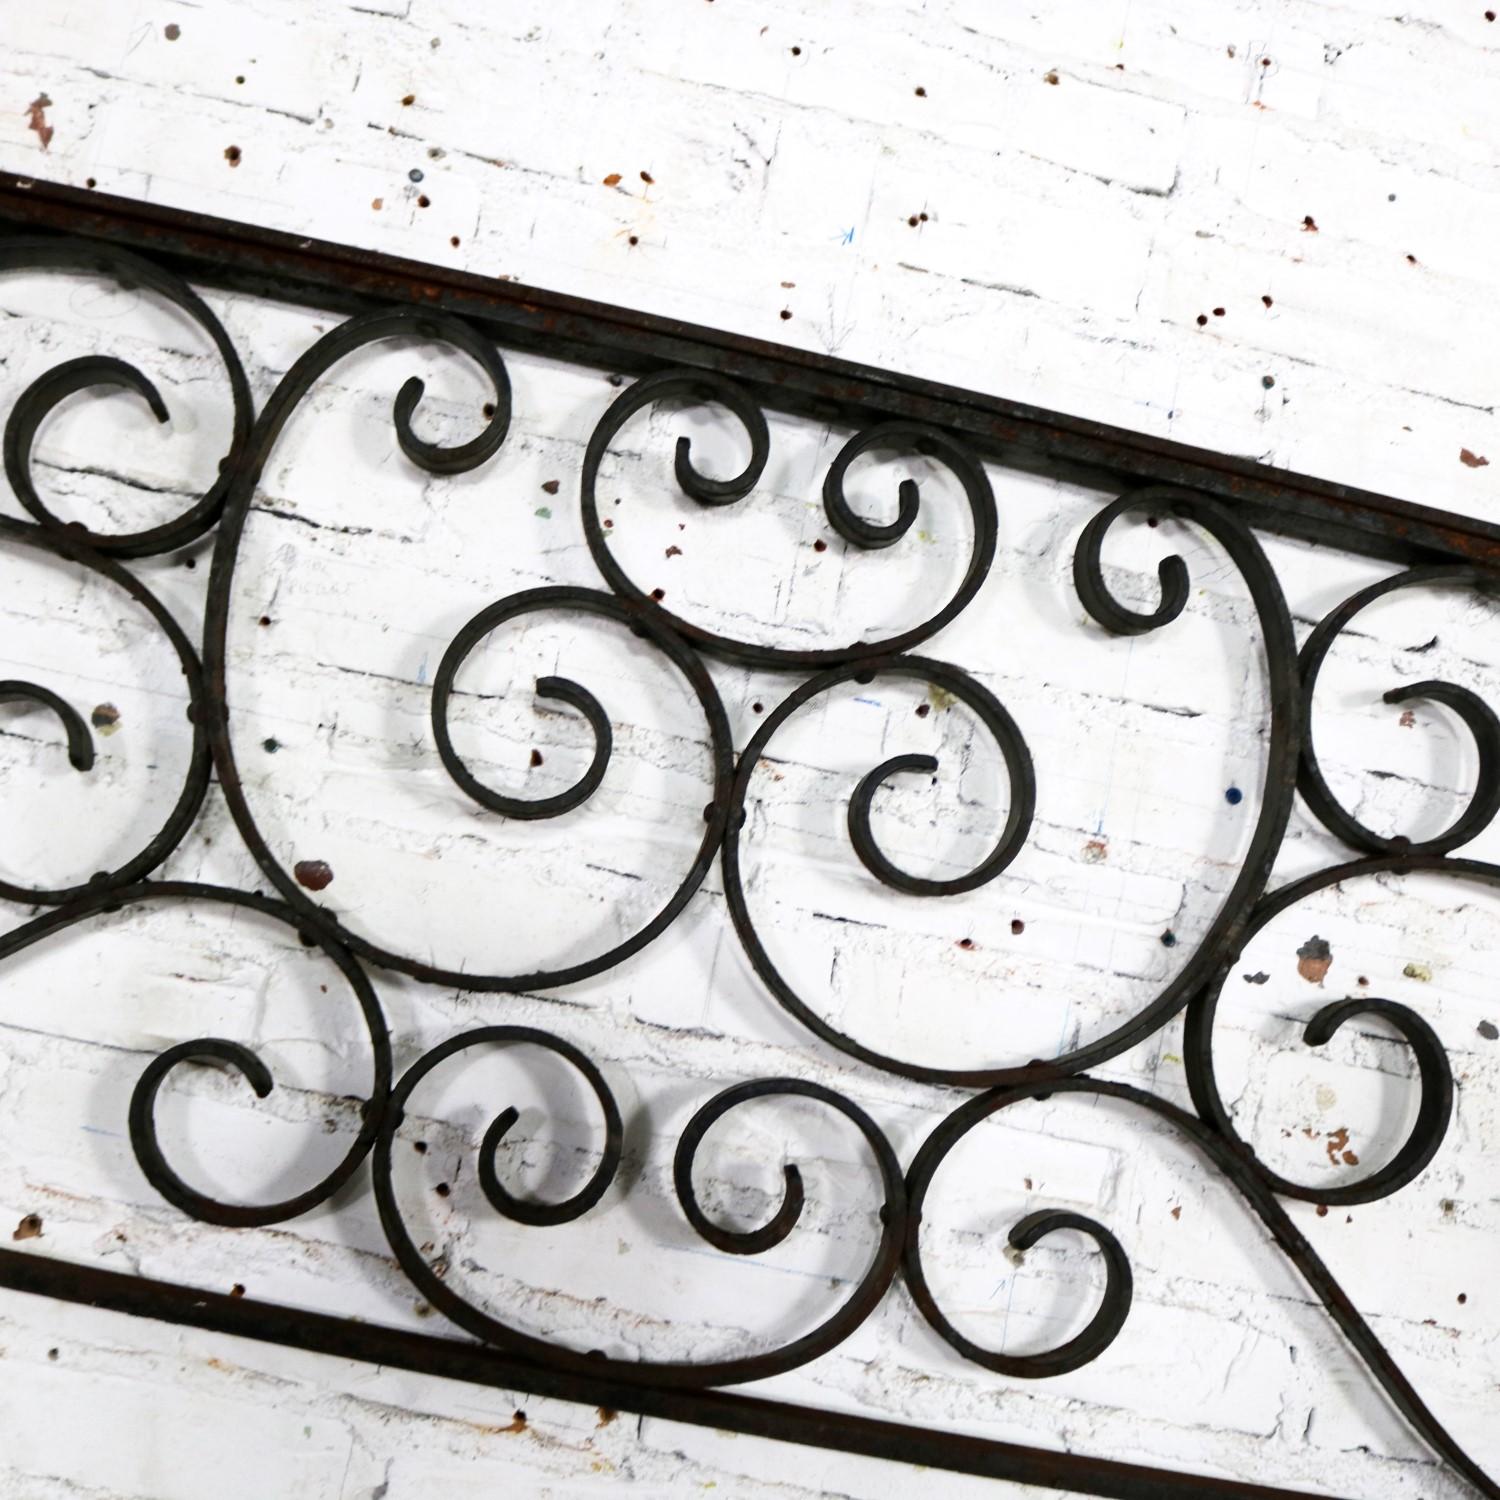 Antique Swirled Design Wrought Iron Railing Piece Trellis or Fence Section For Sale 6